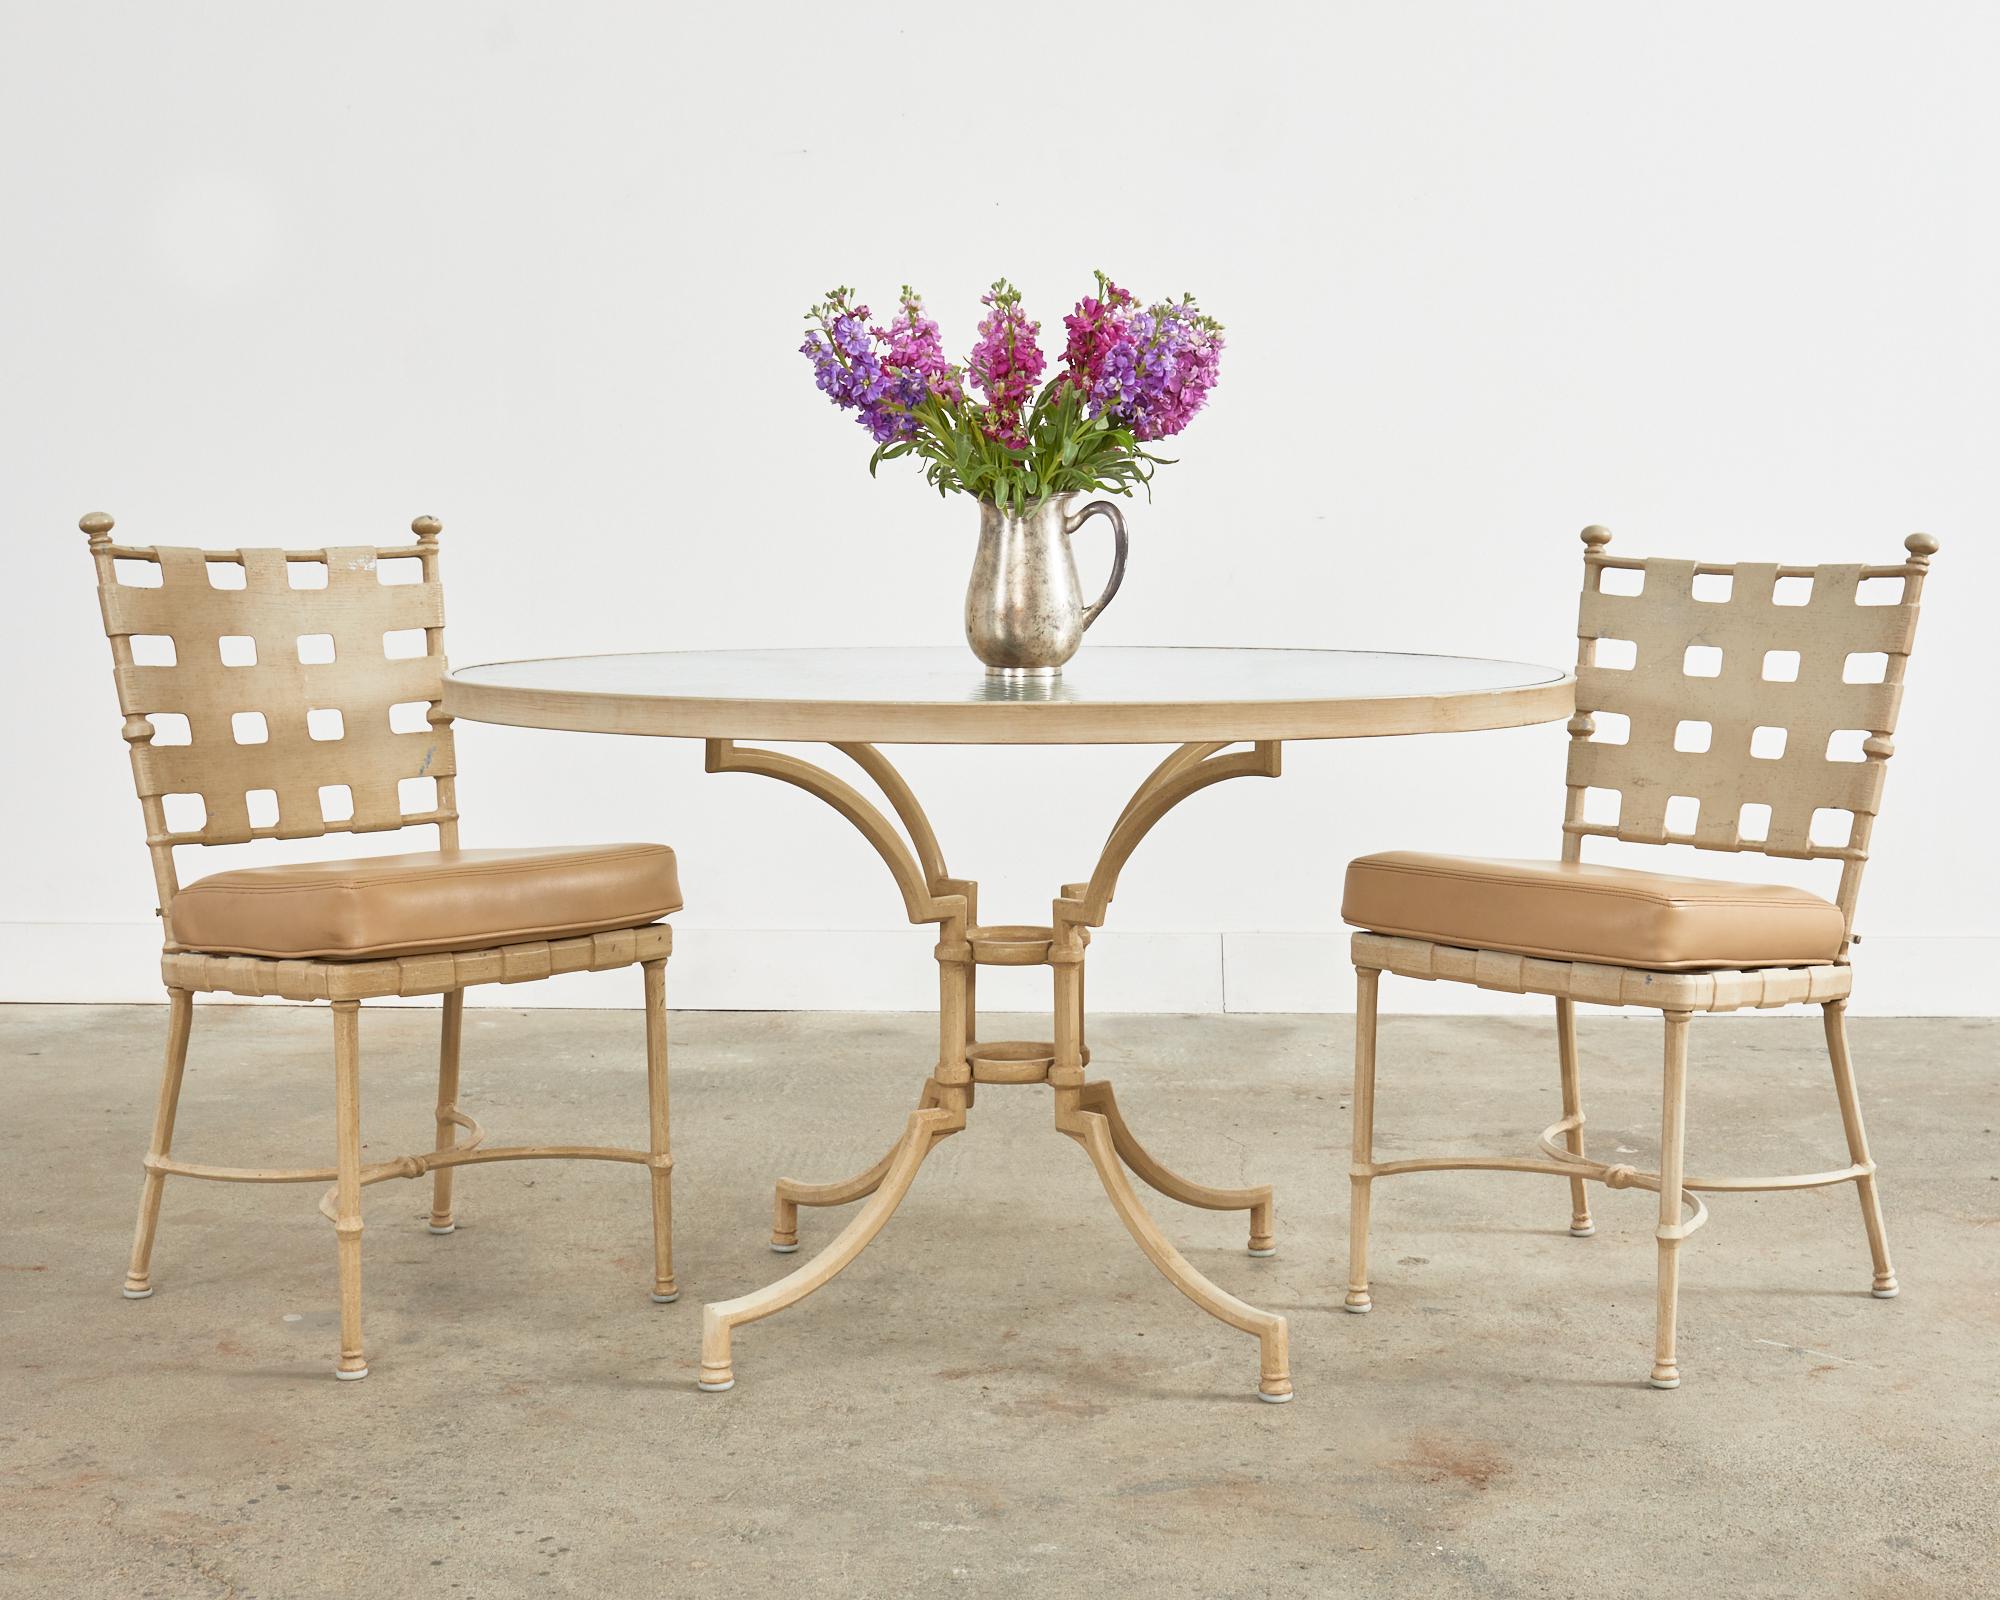 Neoclassical style set of four patio and garden dining chairs made by Brown Jordan. Heavy and solid cast aluminum construction with a lattice design influenced by Mario Papperzini for John Salterini. The chair backs also have the iconic ball finials